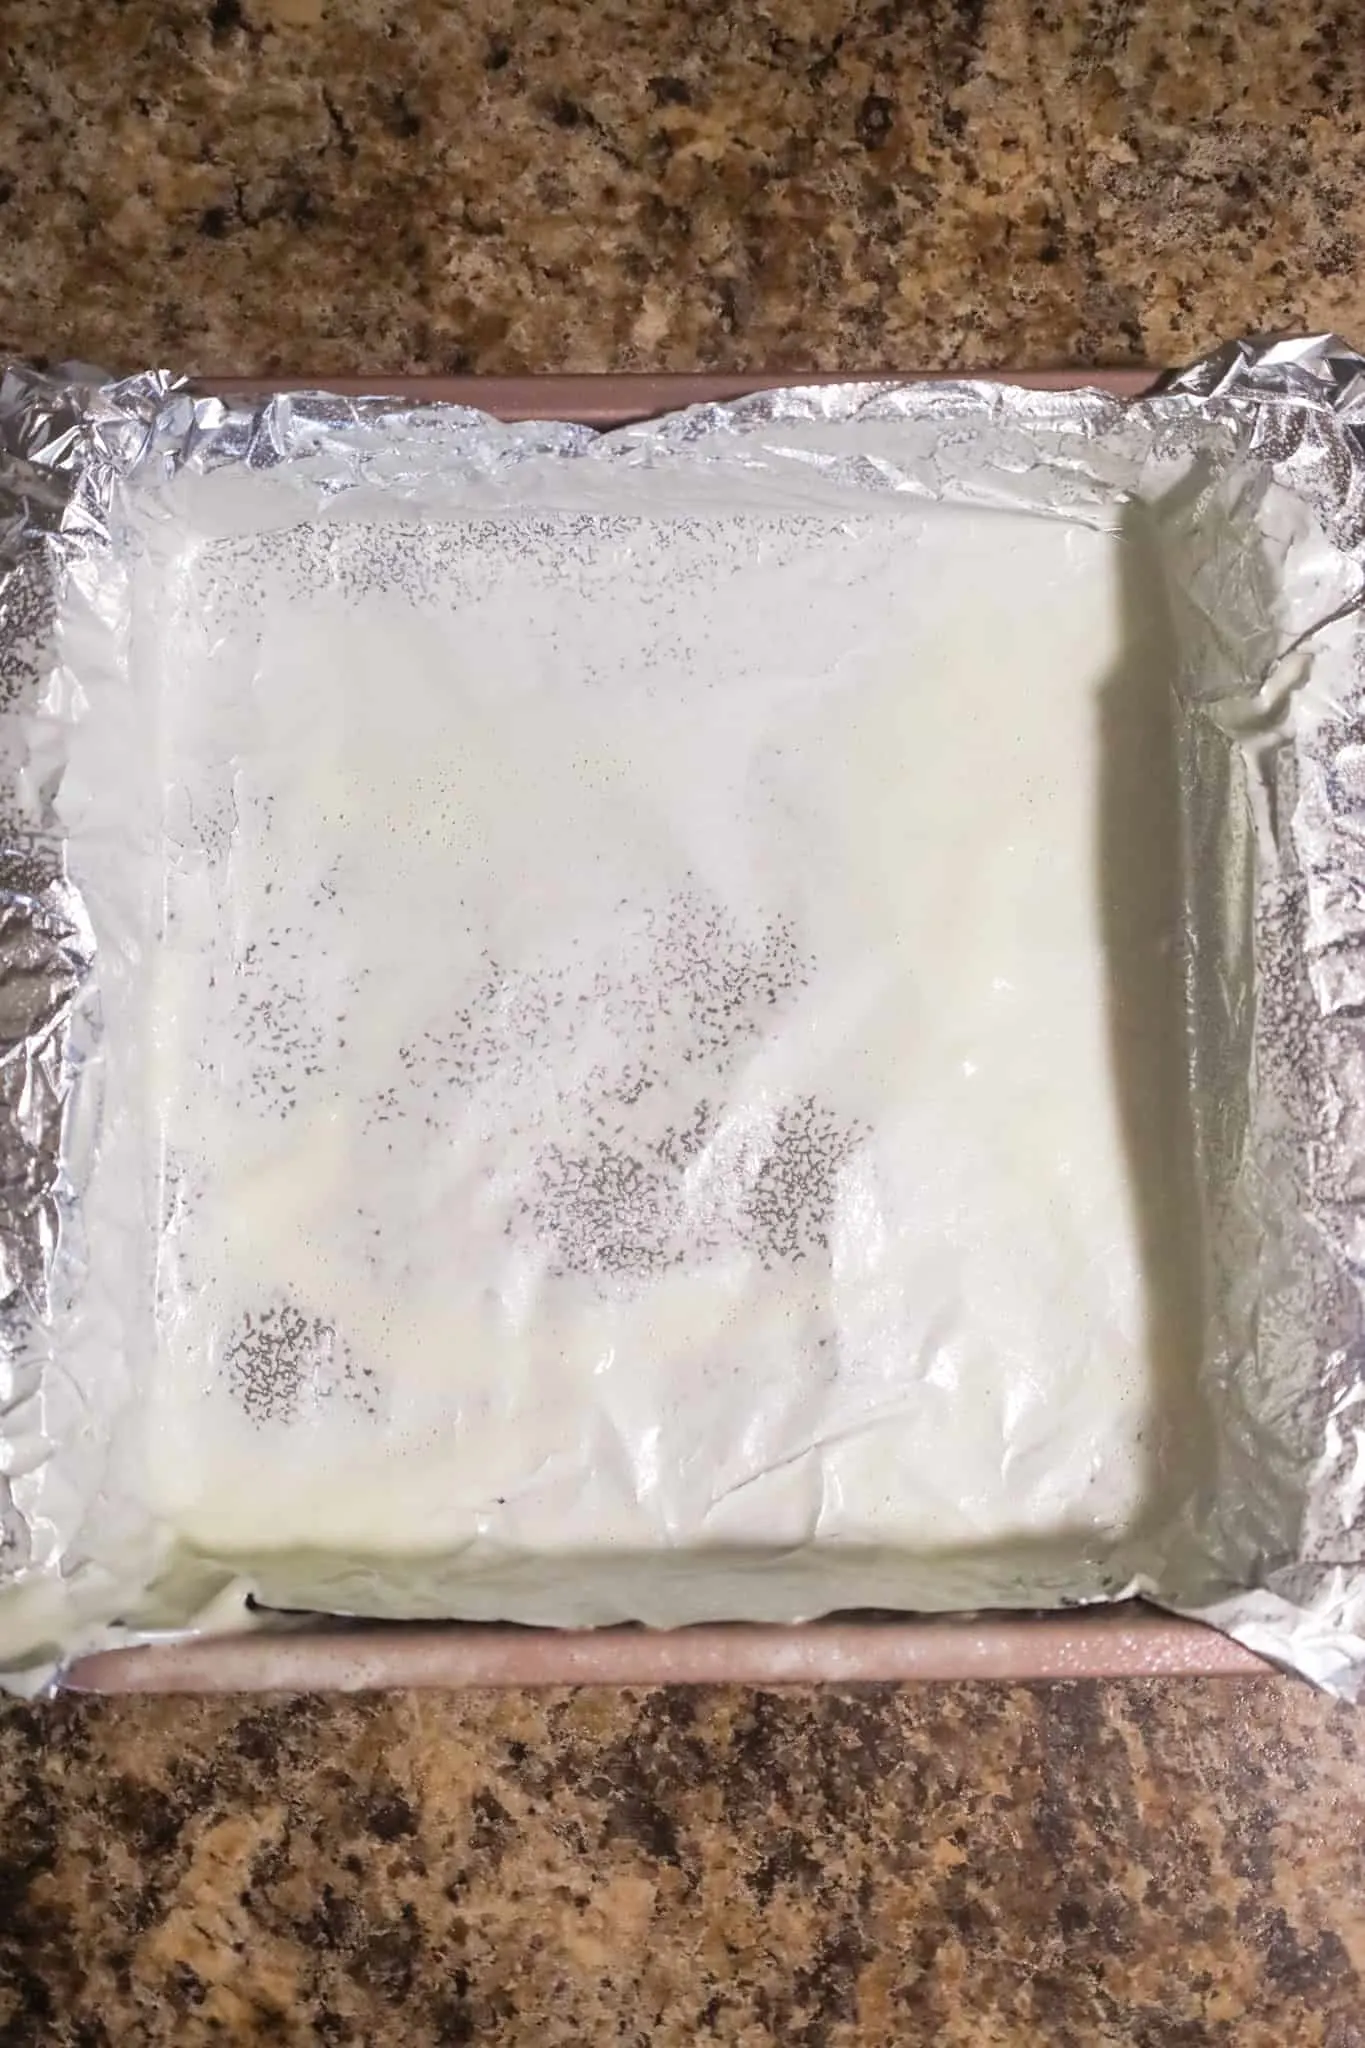 cooking spray coated foil in a baking pan